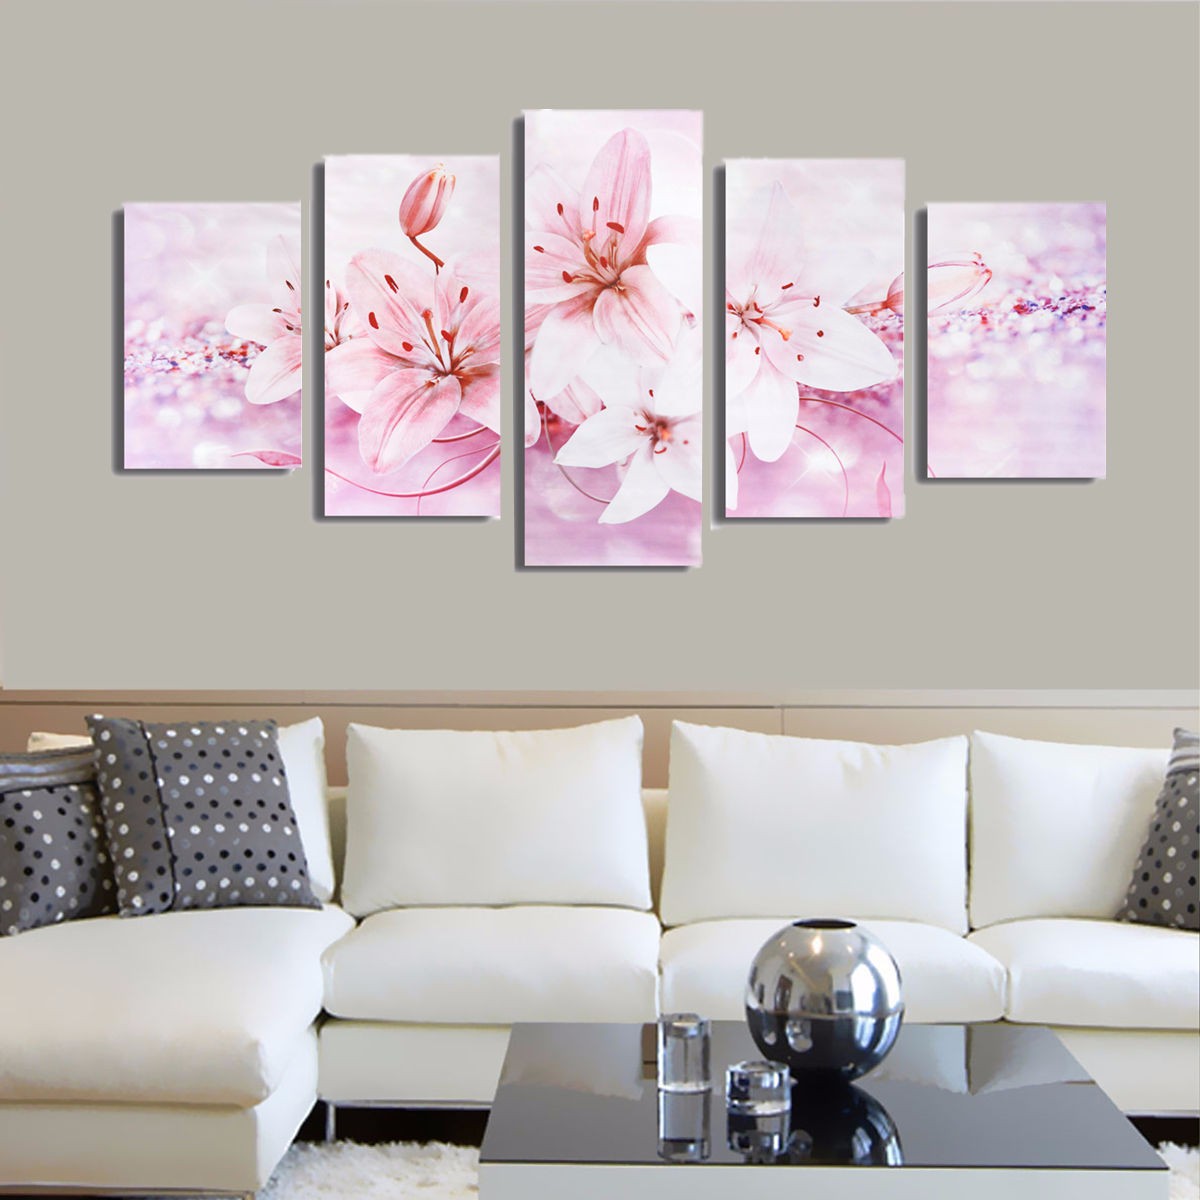 5PCS-Frameless-Canvas-Paintings-Lilies-Art-Paint-for-Home-Wall-Decoration-1080757-9